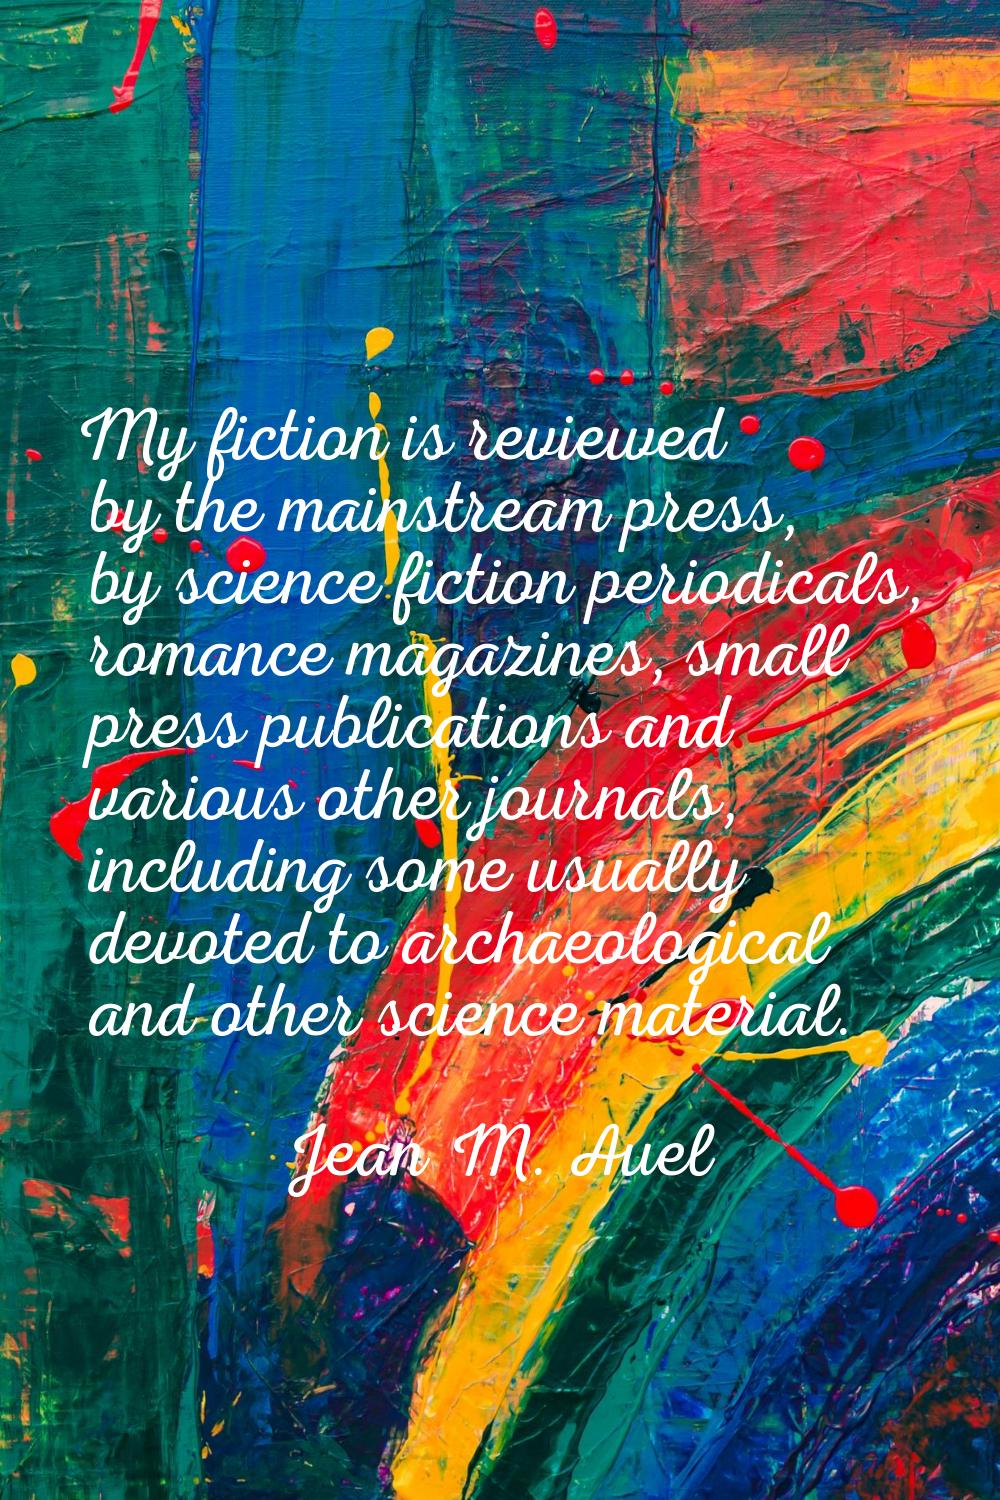 My fiction is reviewed by the mainstream press, by science fiction periodicals, romance magazines, 